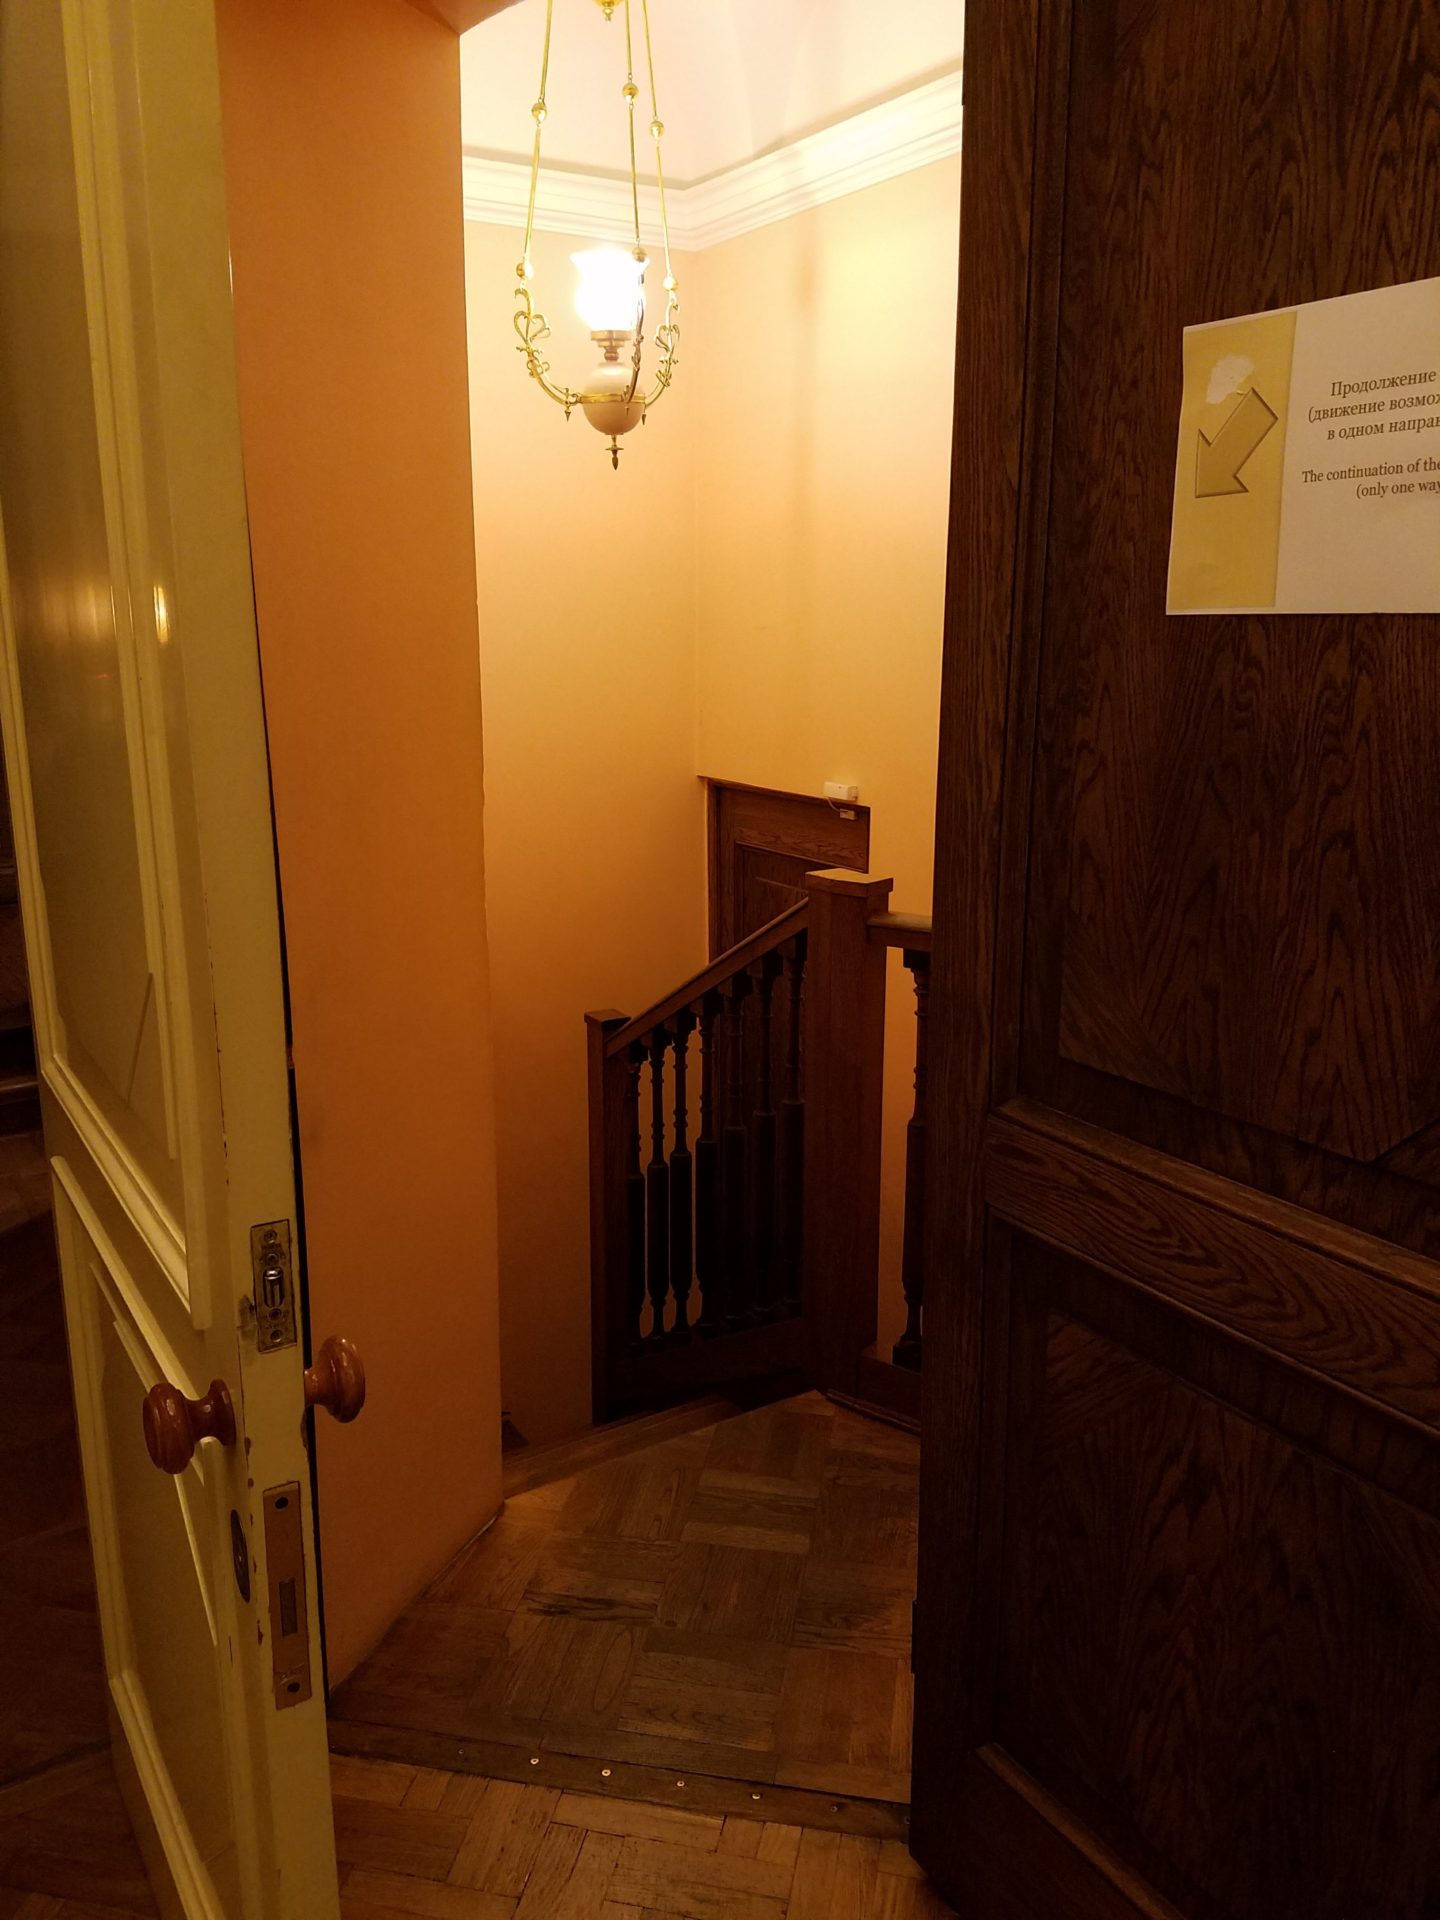 a door with a light fixture and a staircase